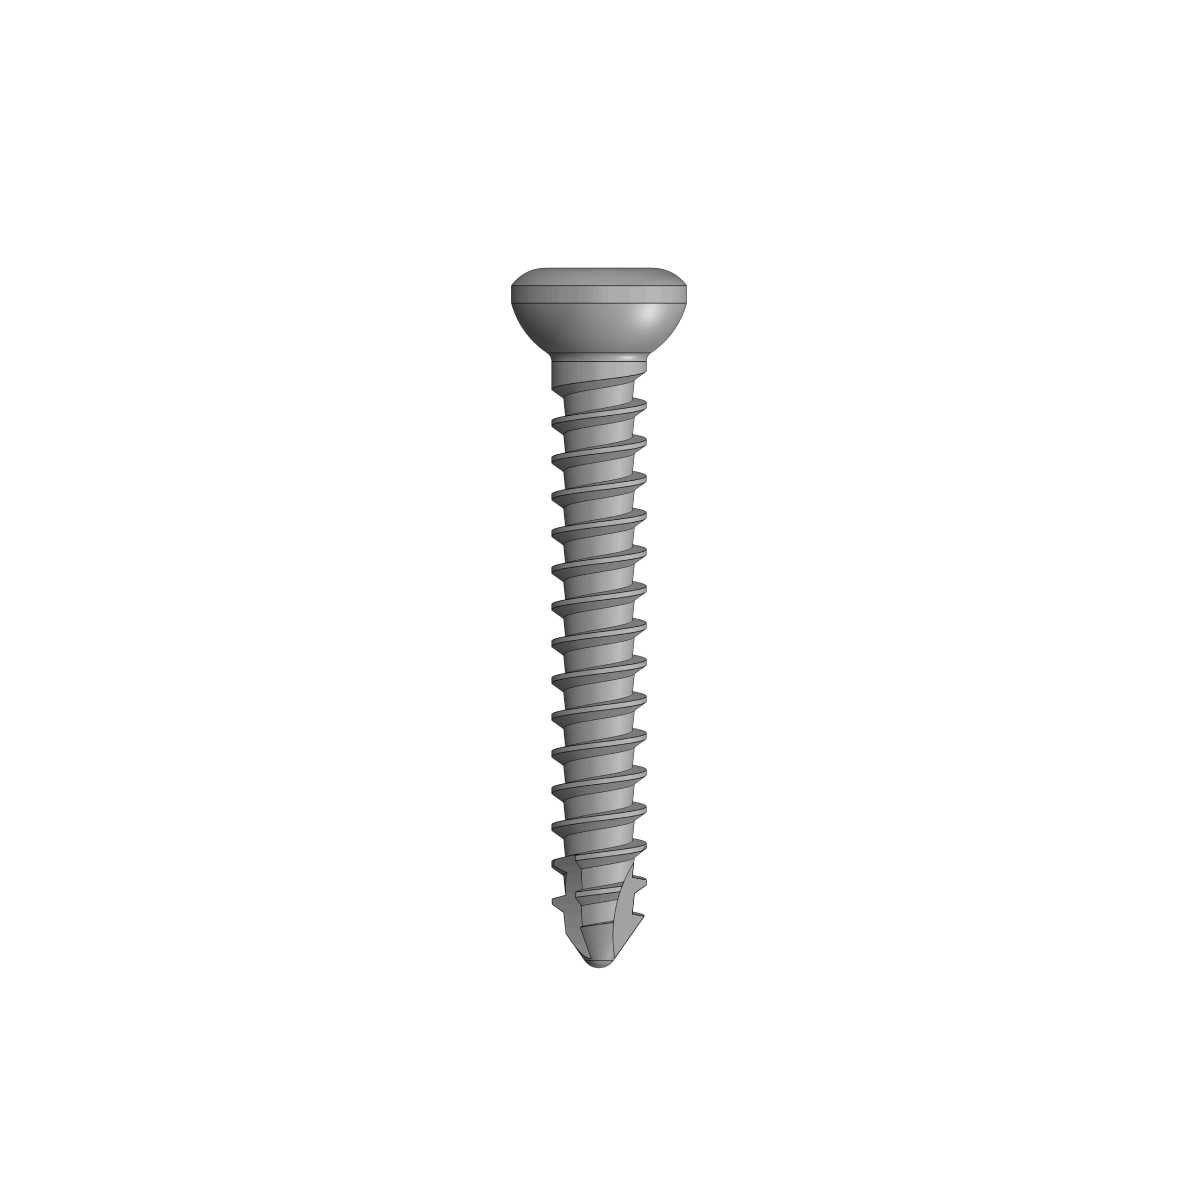 2.7mm Cortical Screw – Self Tapping (HEXDRIVE)